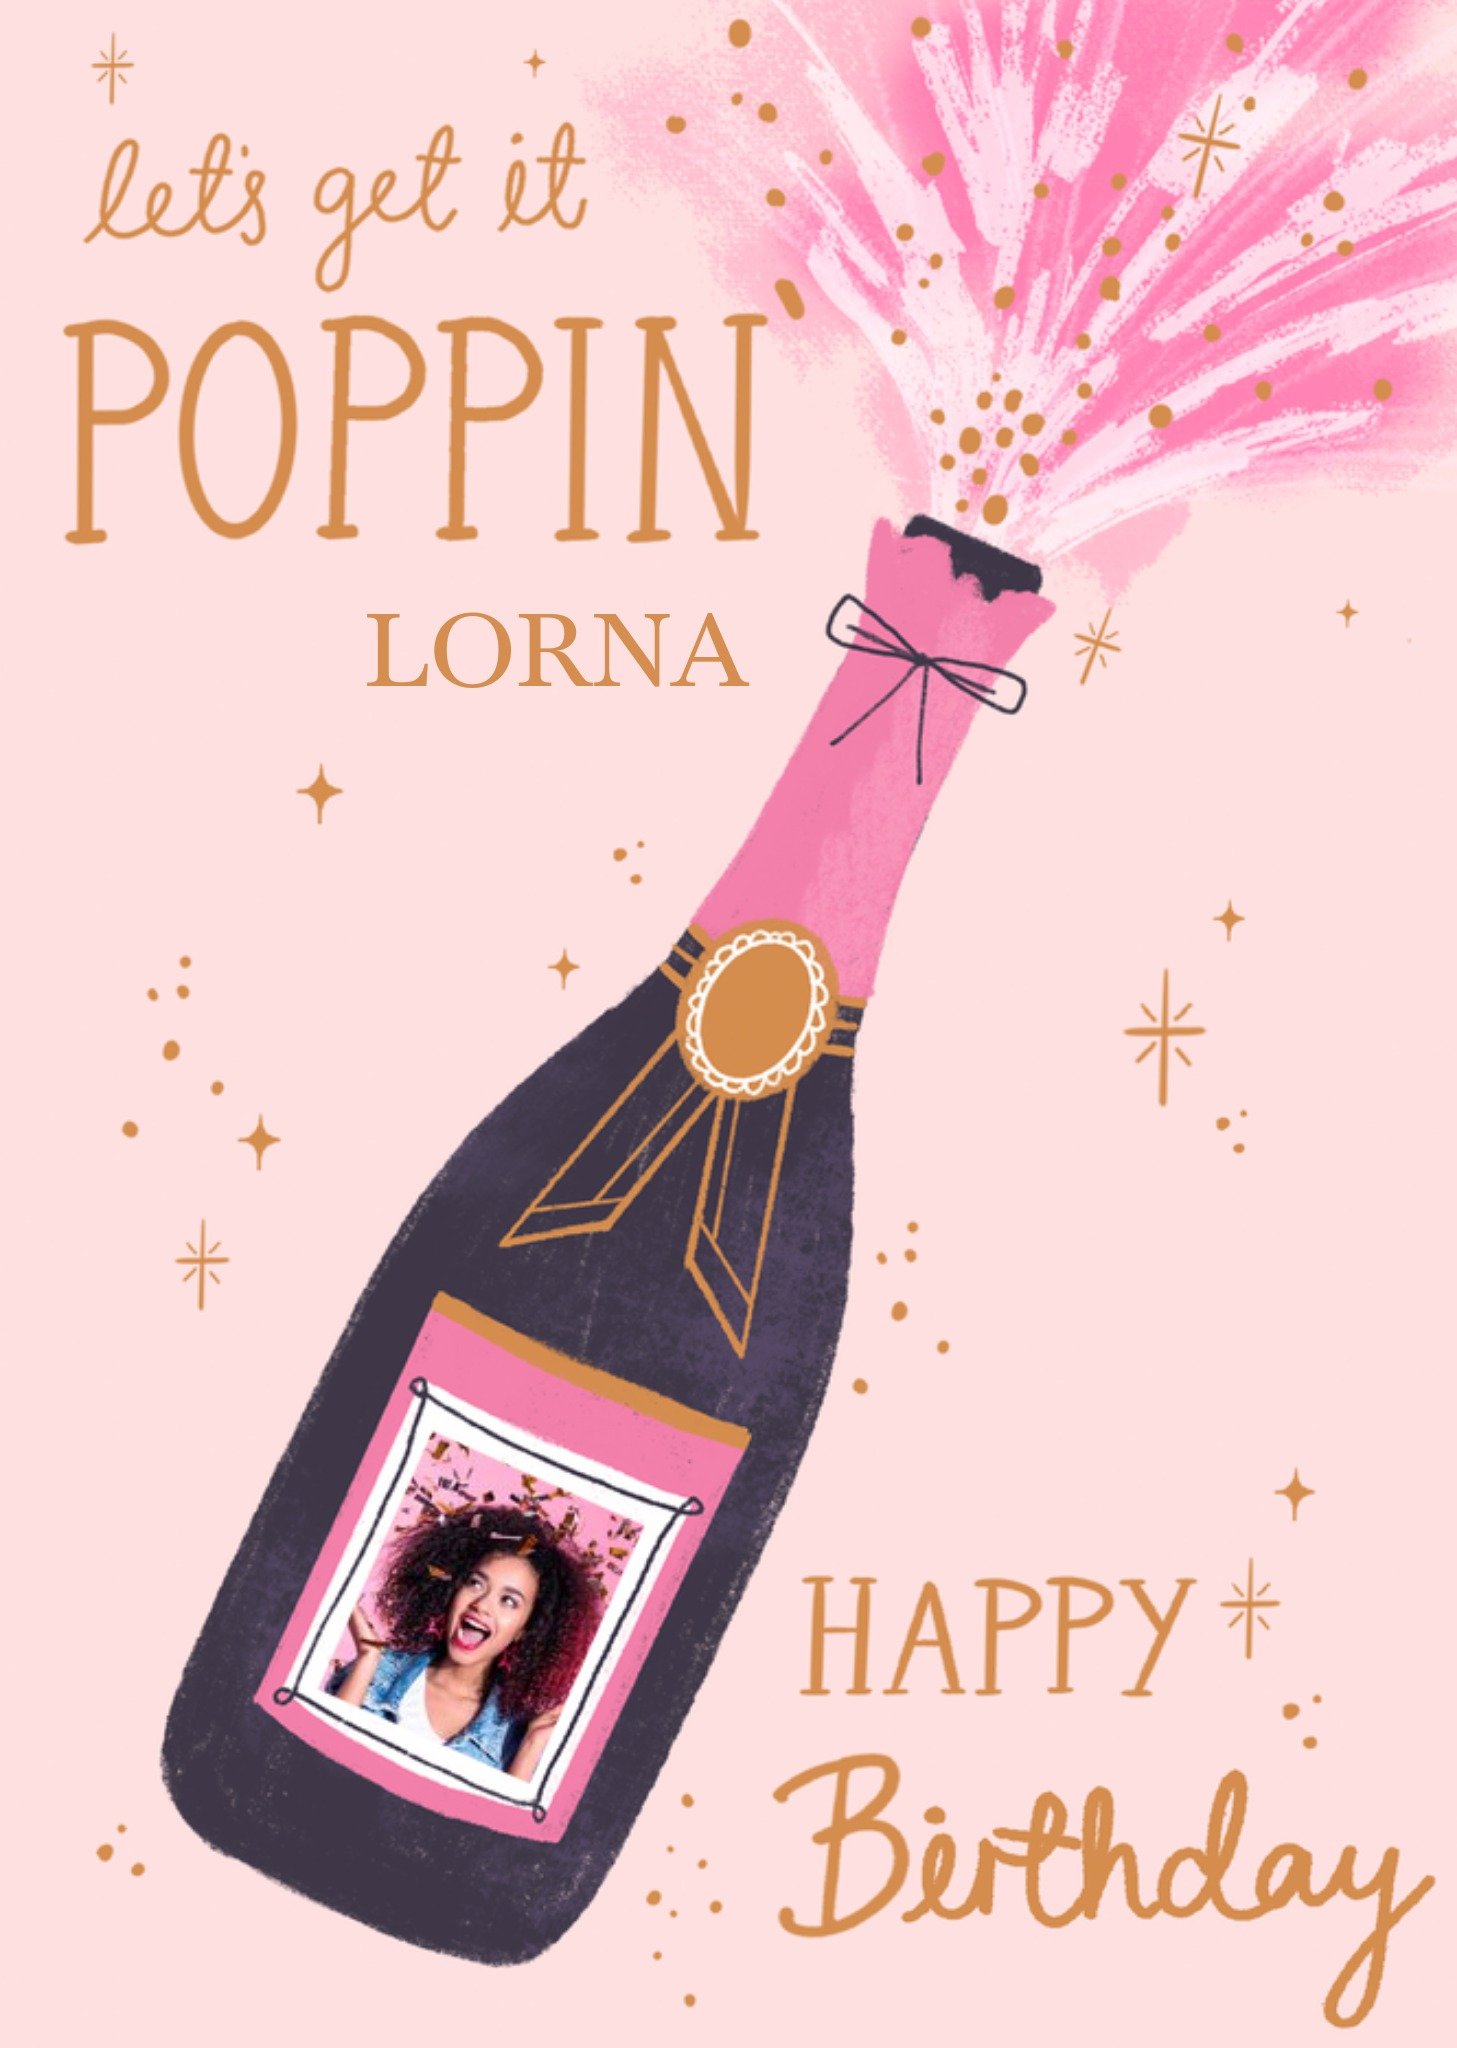 Moonpig Illustration Of A Bottle Of Bubbly Let's Get It Poppin' Photo Upload Birthday Card Ecard